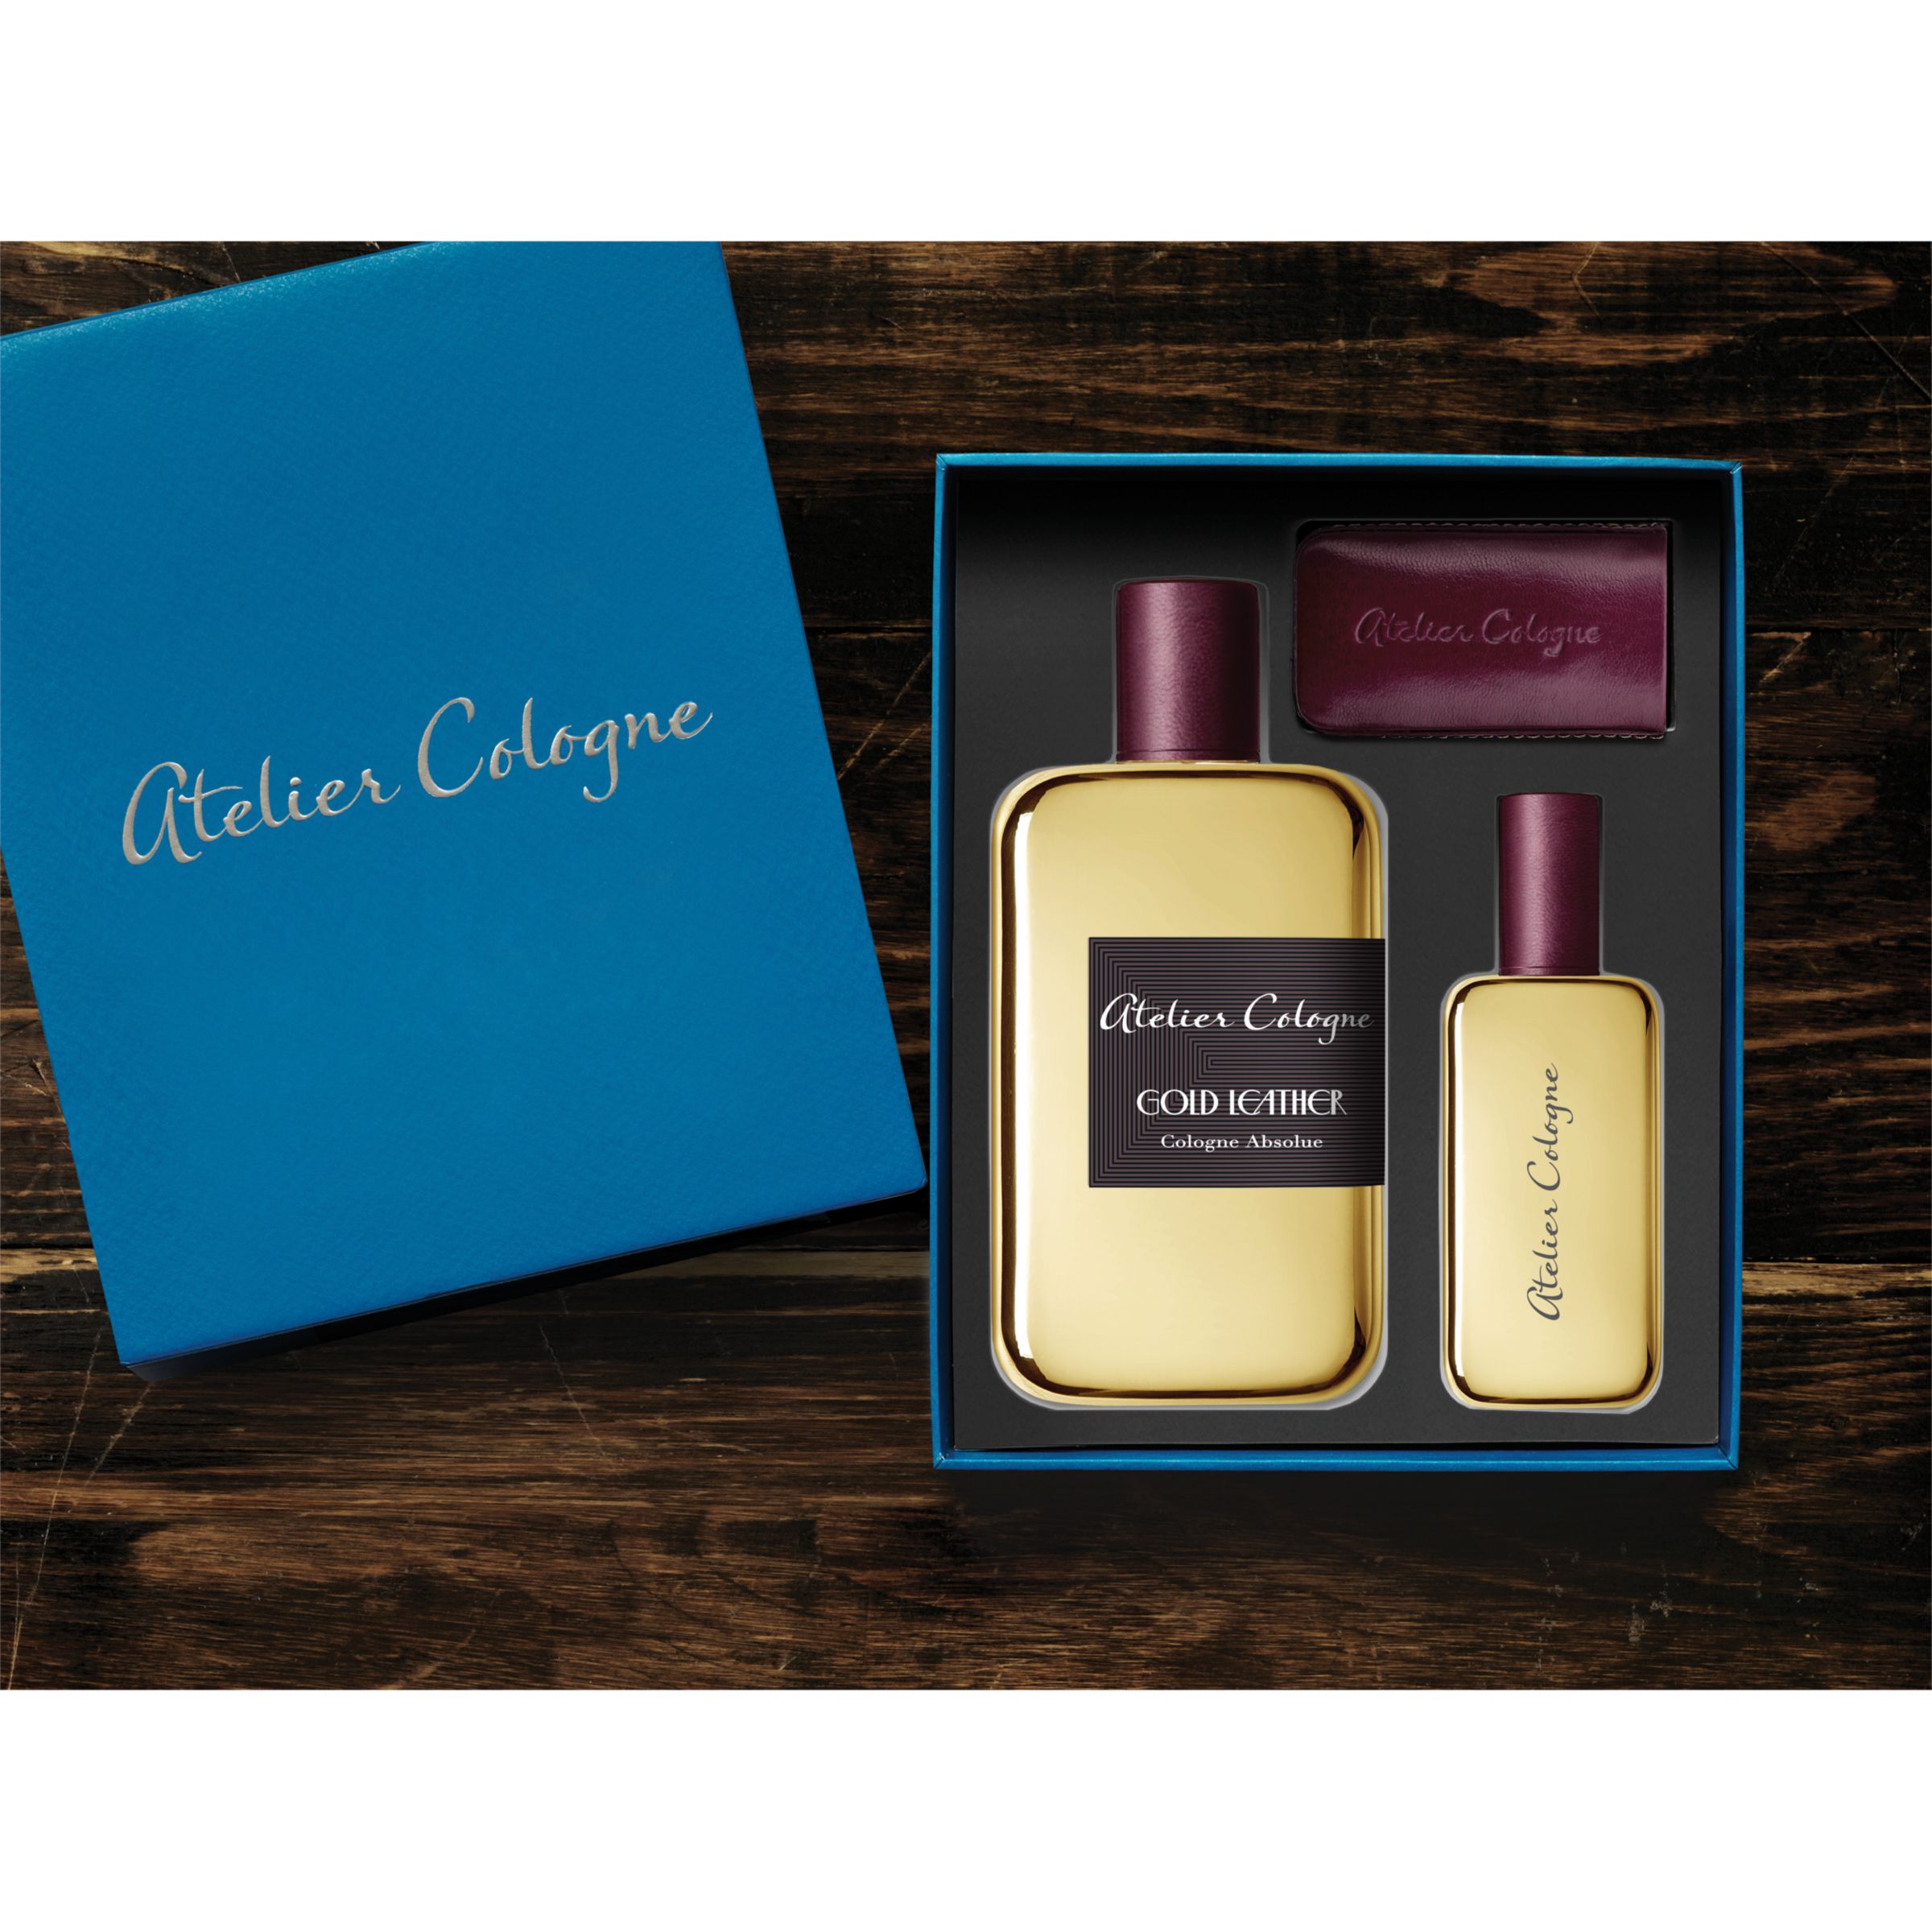 Atelier Cologne Gold Leather Cologne Absolue, 200 mL with Personalized  Travel Spray, 30 mL